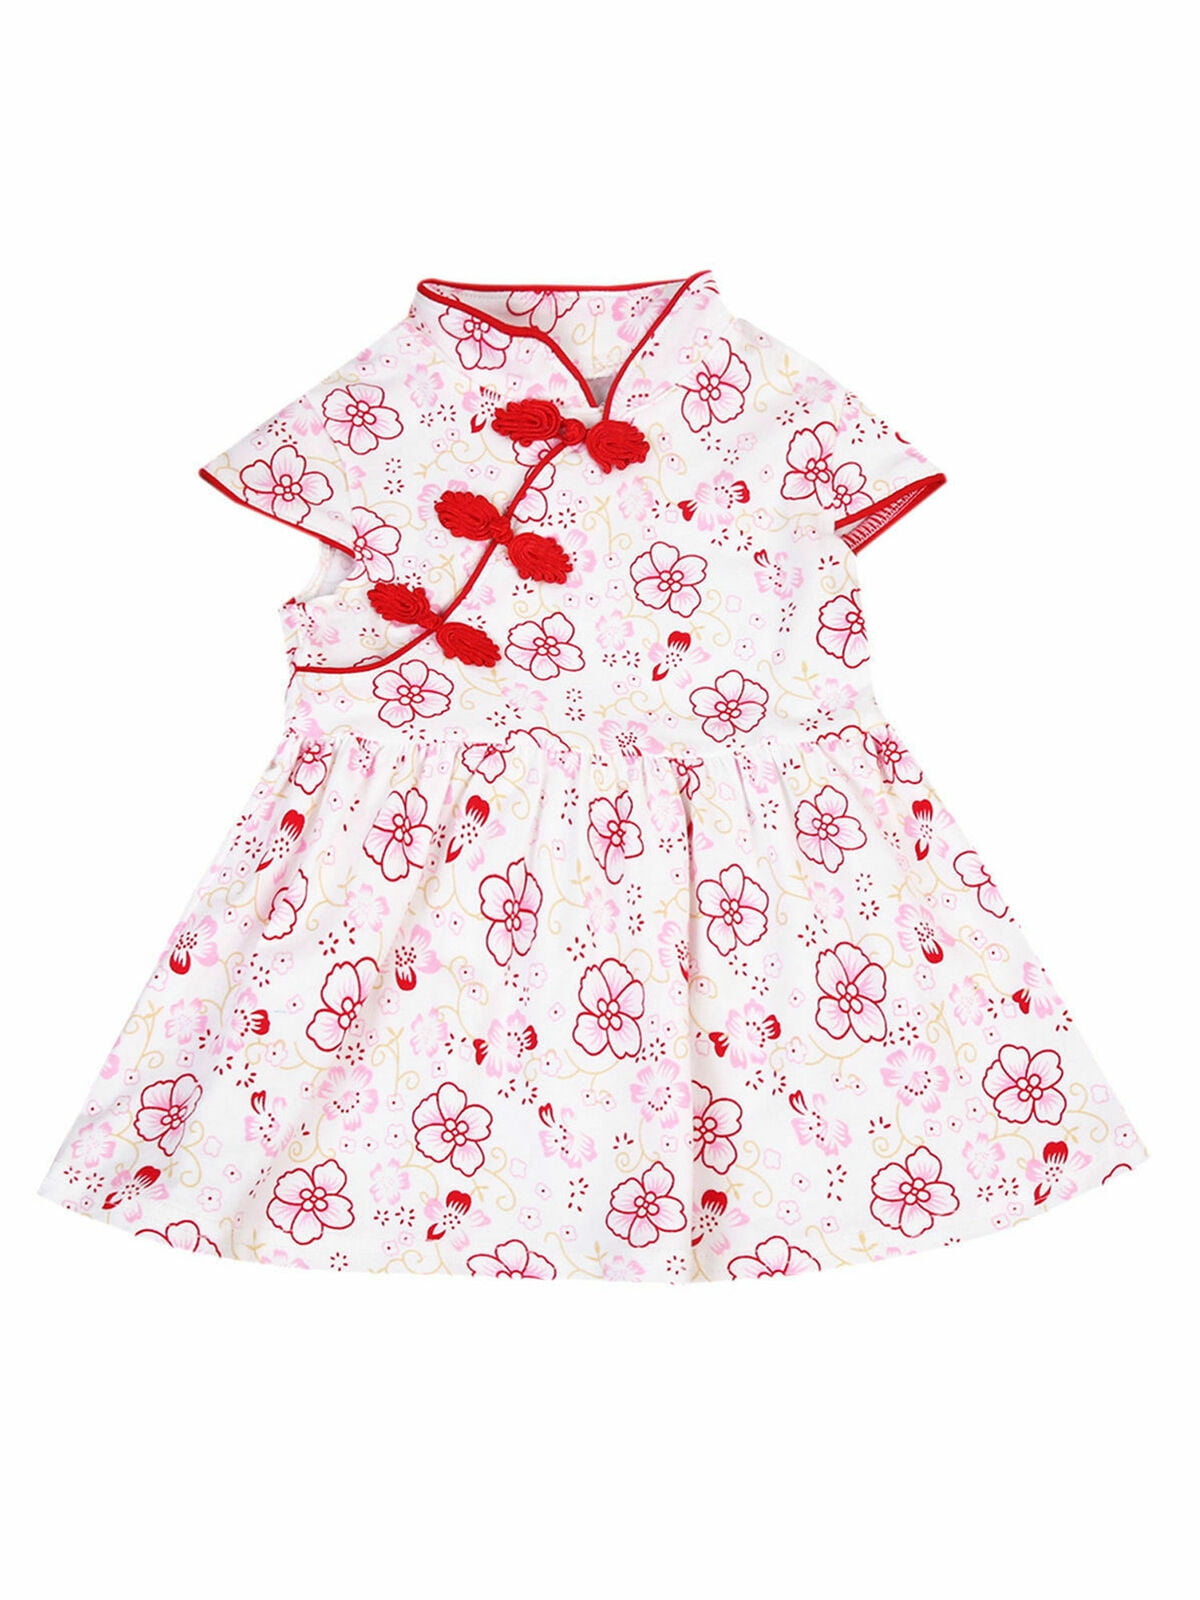 Baby Girl Kid Floral Cheongsam Dress Printed Chinese Classic Qipao Skirt Clothes 